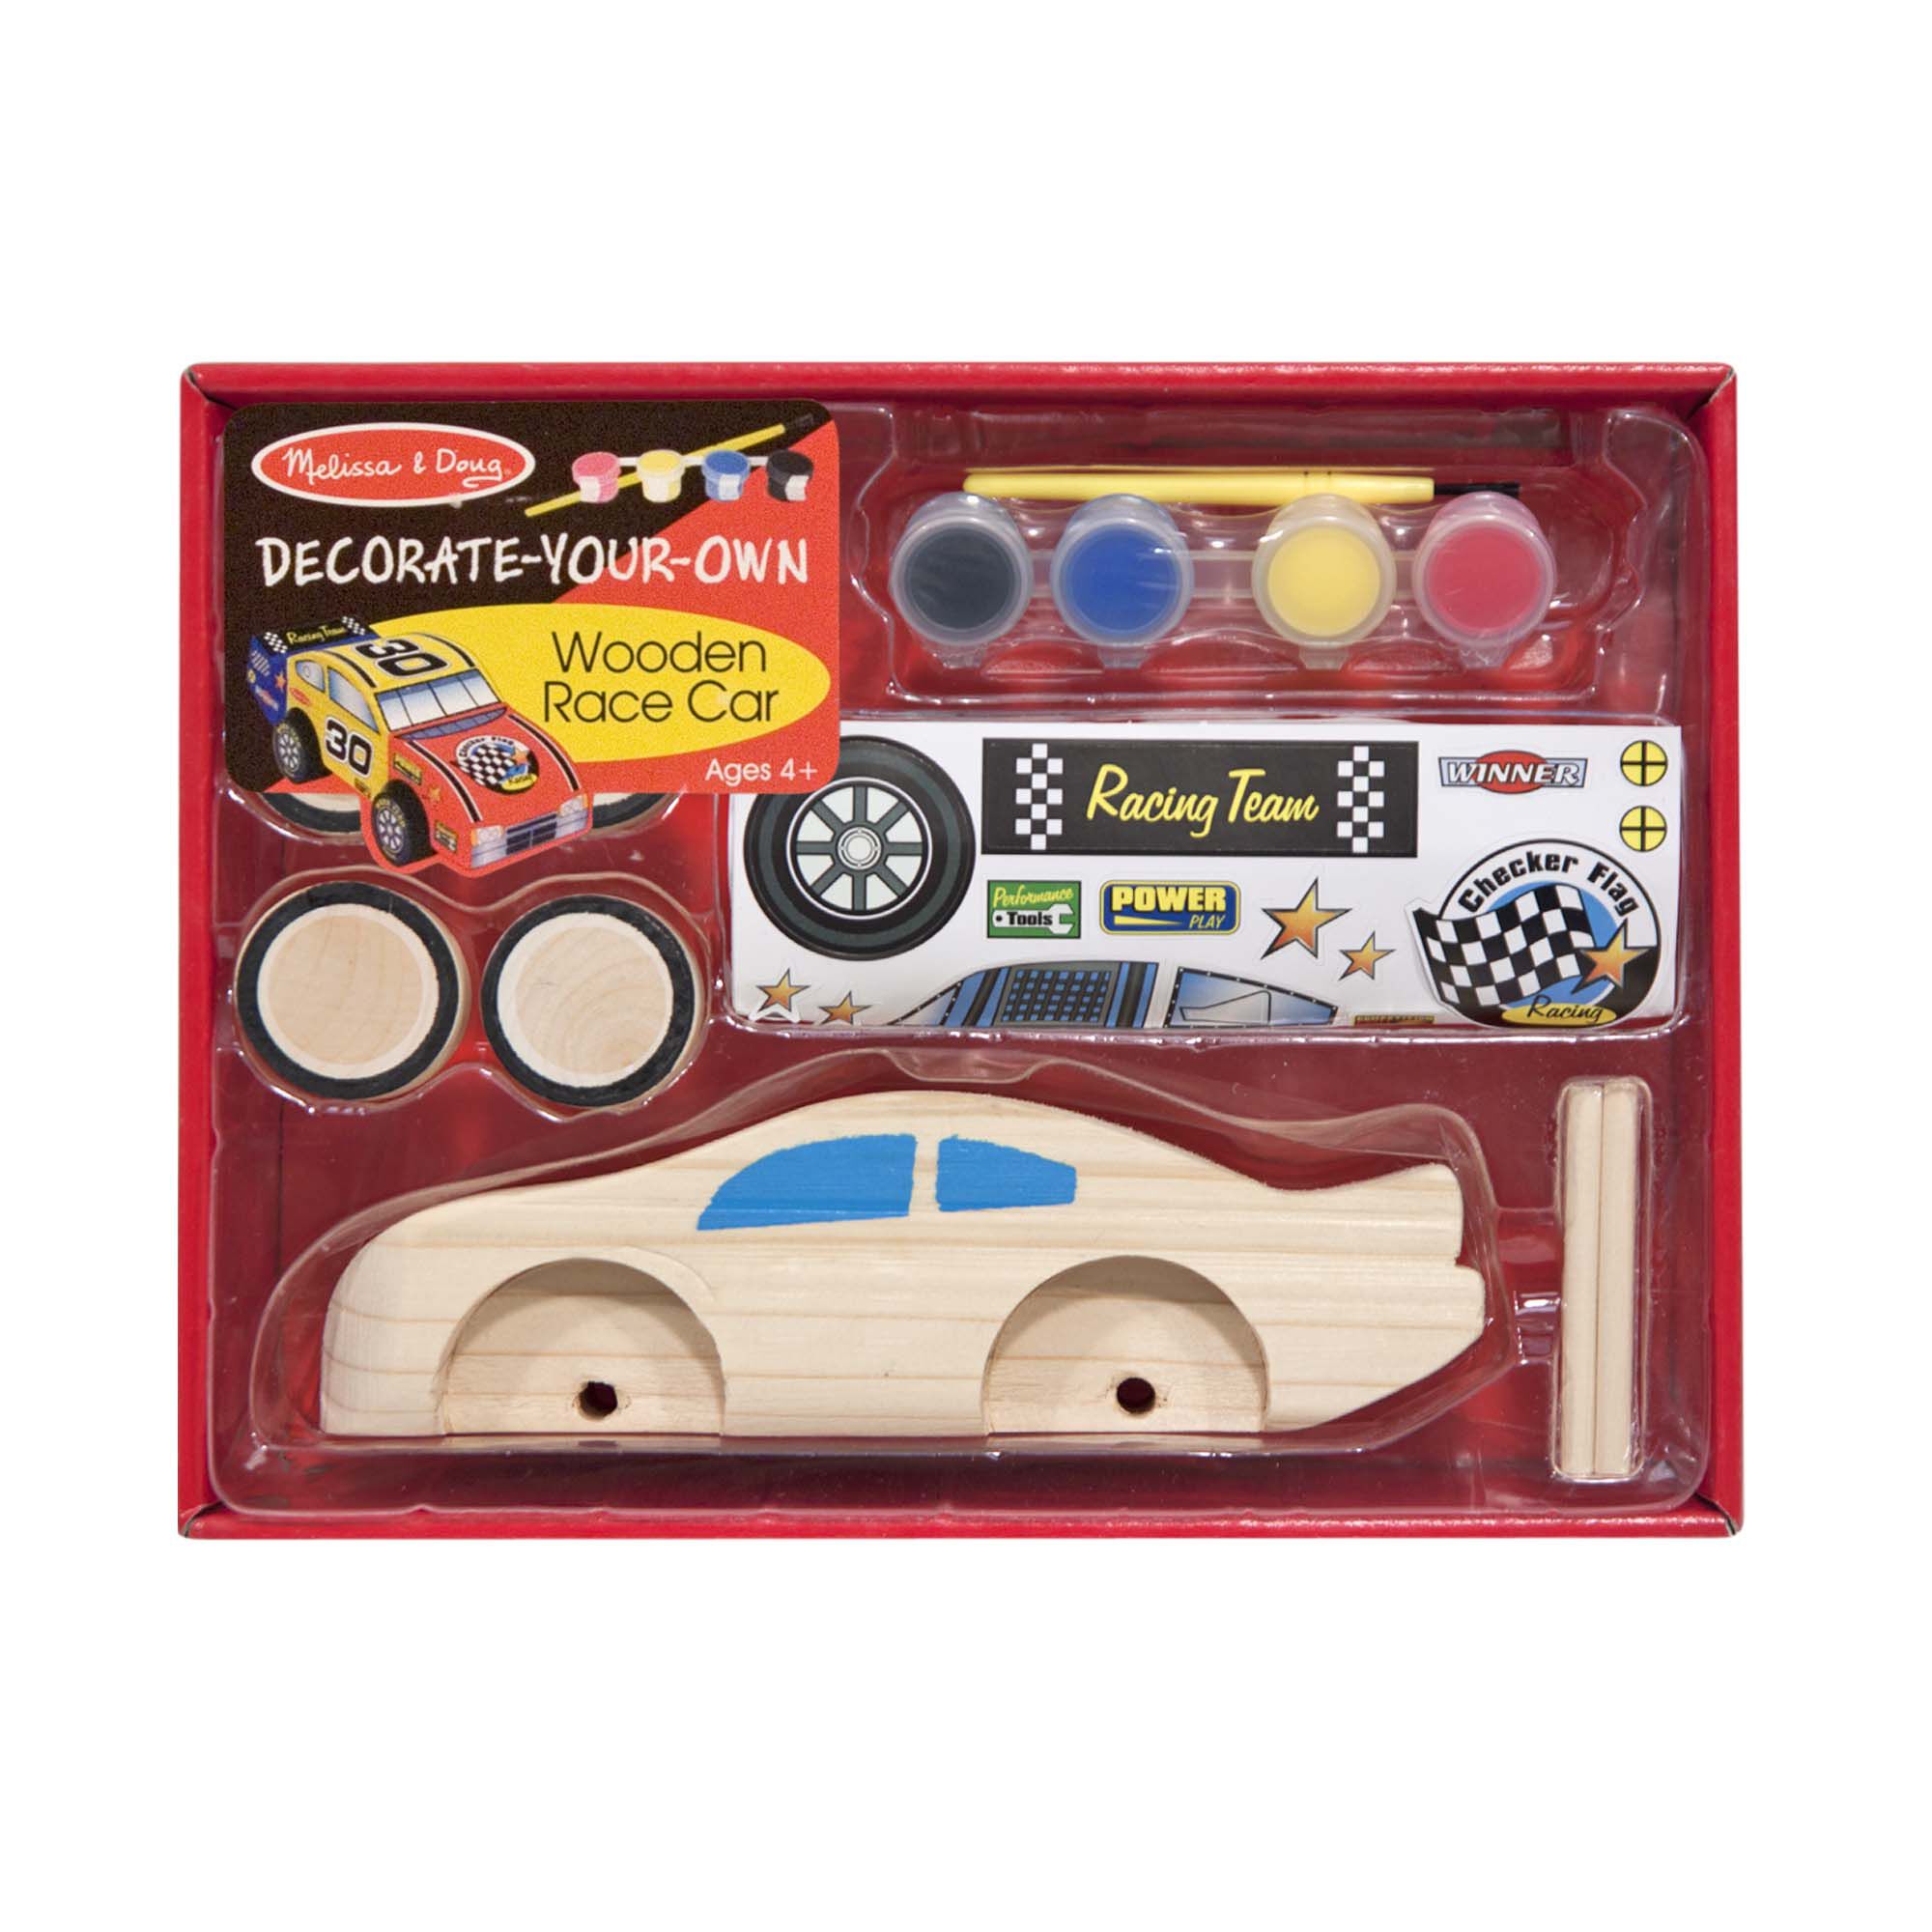 Decorate Your Own Wooden Race Car 12680